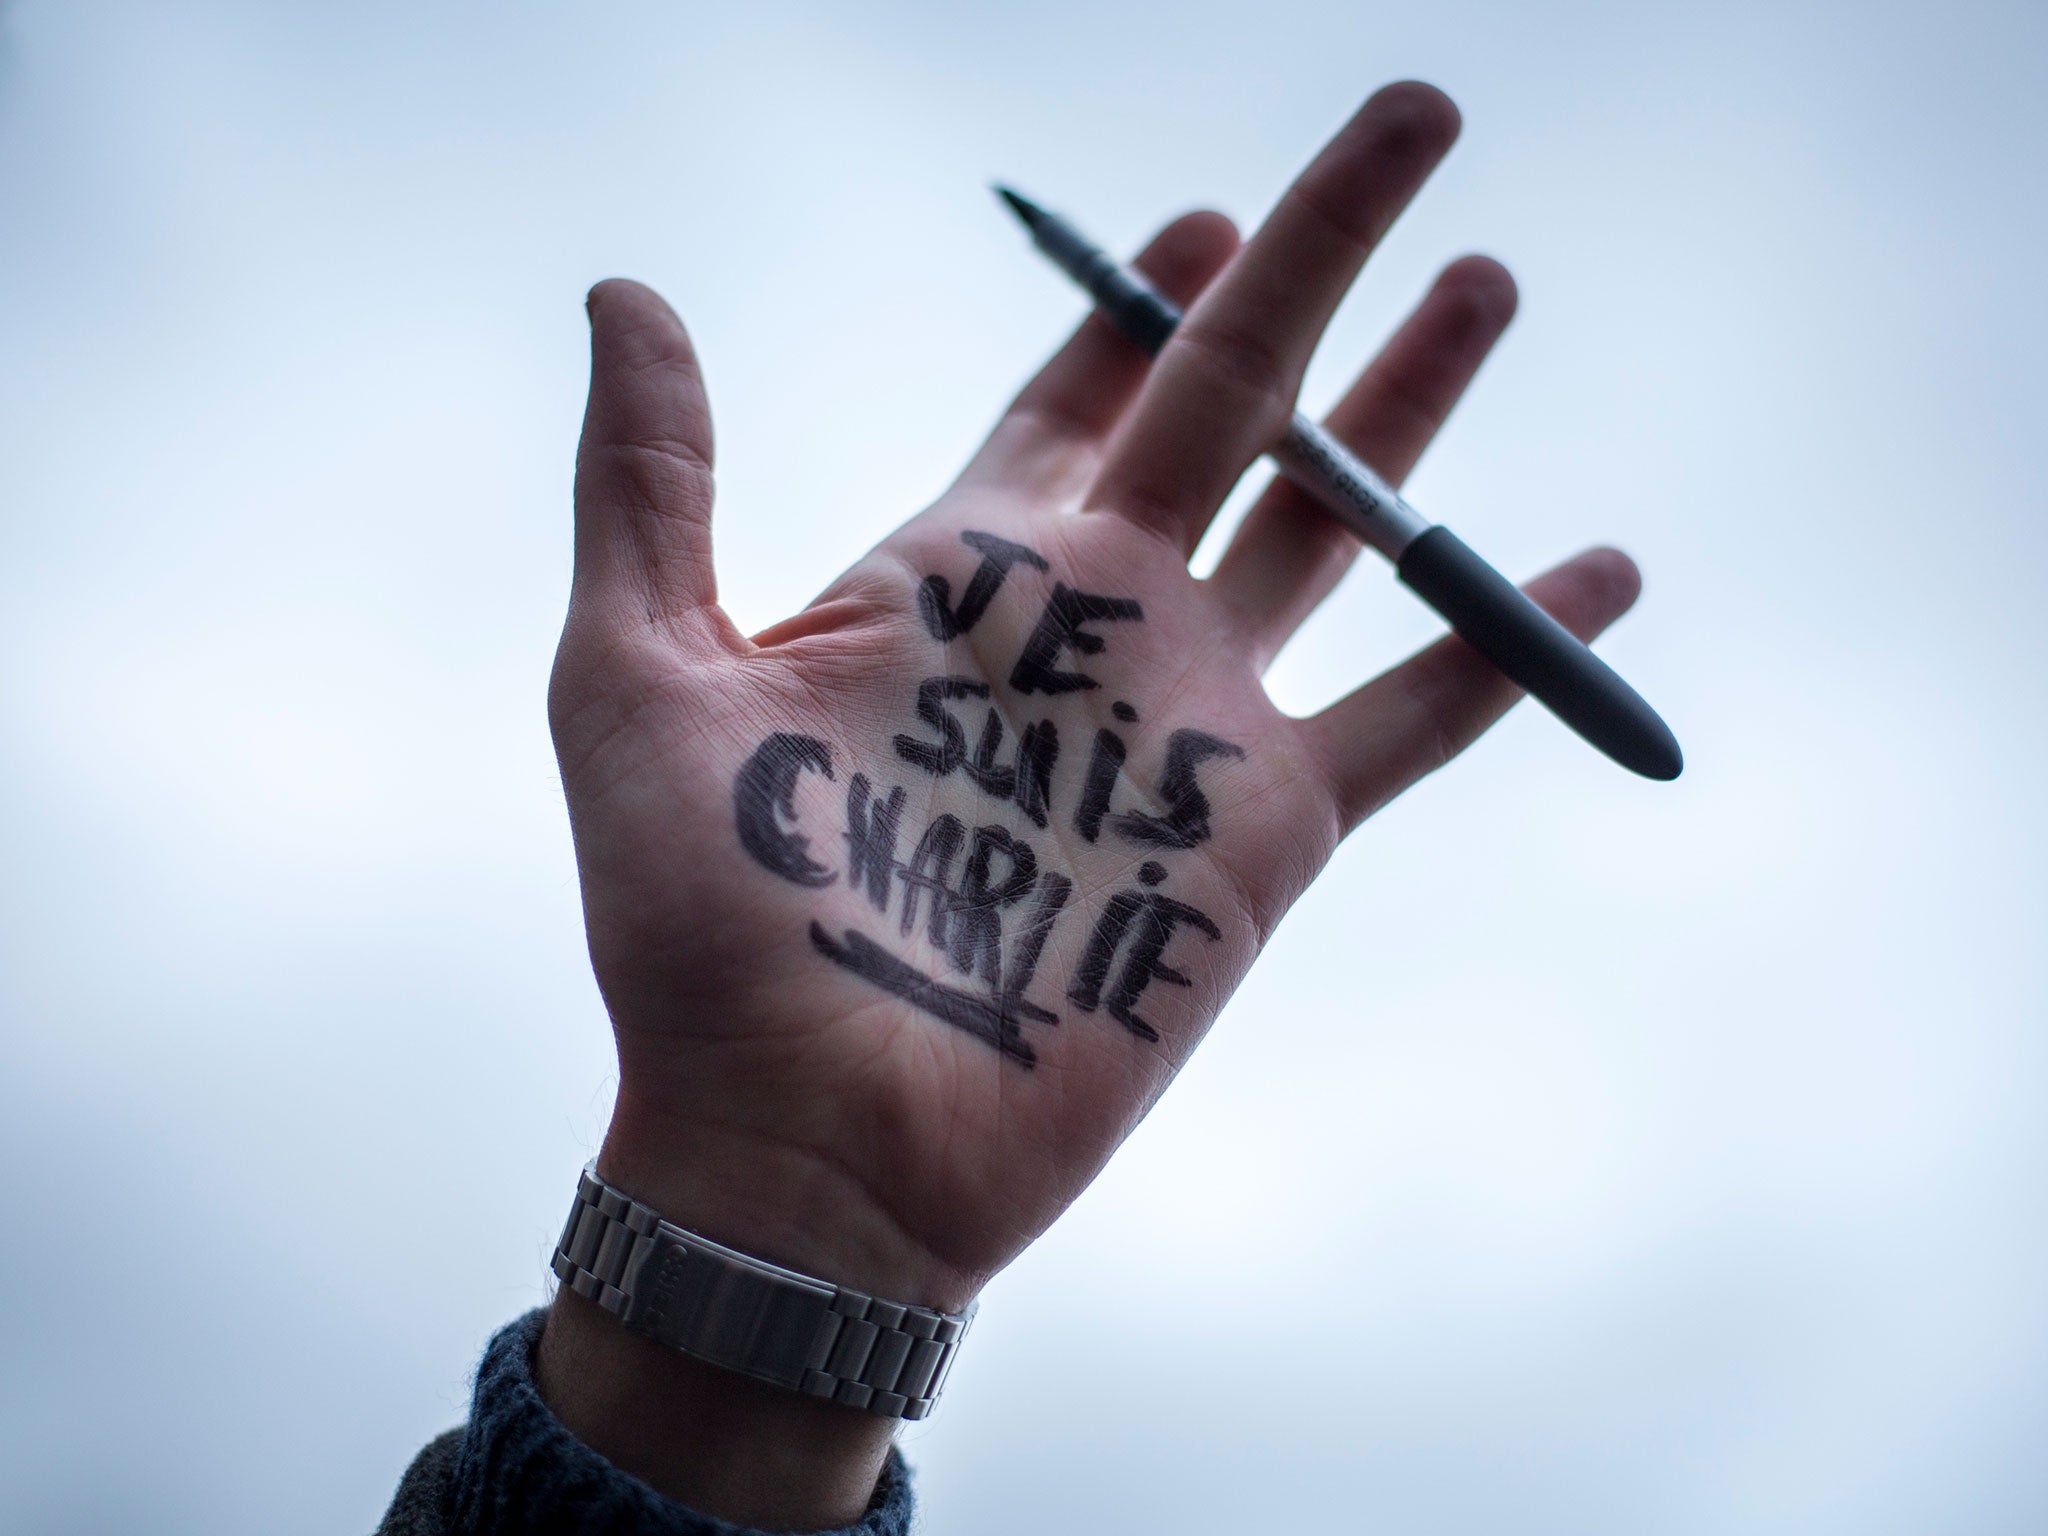 'Je Suis Charlie' written on the hand of a protester at the Paris anti-terrorism demonstration